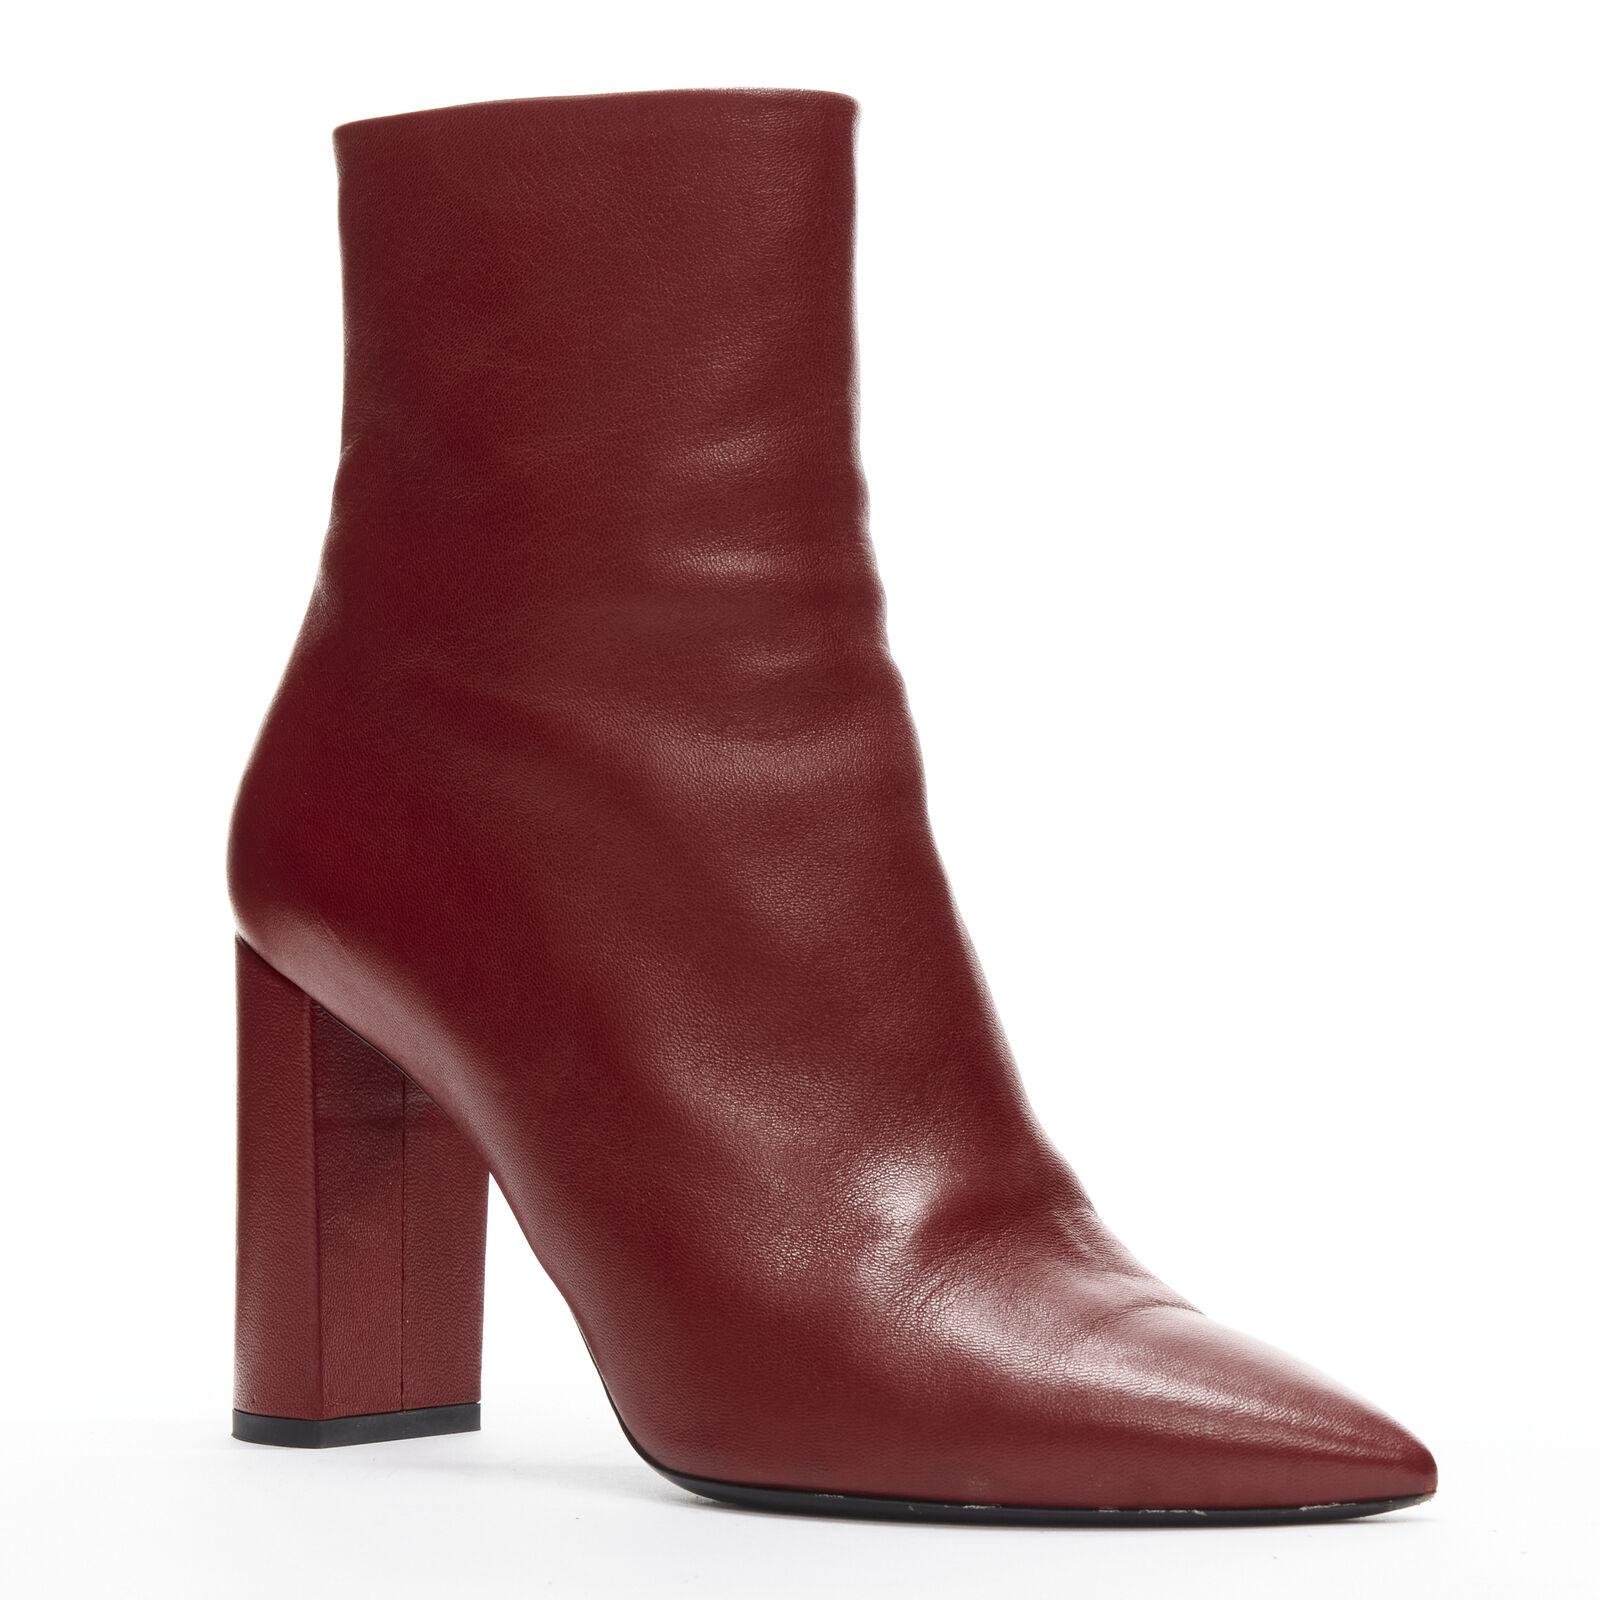 SAINT LAURENT red leather point toe block heeled ankle boots EU39 US9
Reference: AAWC/A00133
Brand: Saint Laurent
Designer: Anthony Vaccarello
Material: Leather
Color: Red
Pattern: Solid
Closure: Zip
Lining: Leather
Extra Details: Logo zipper.
Made